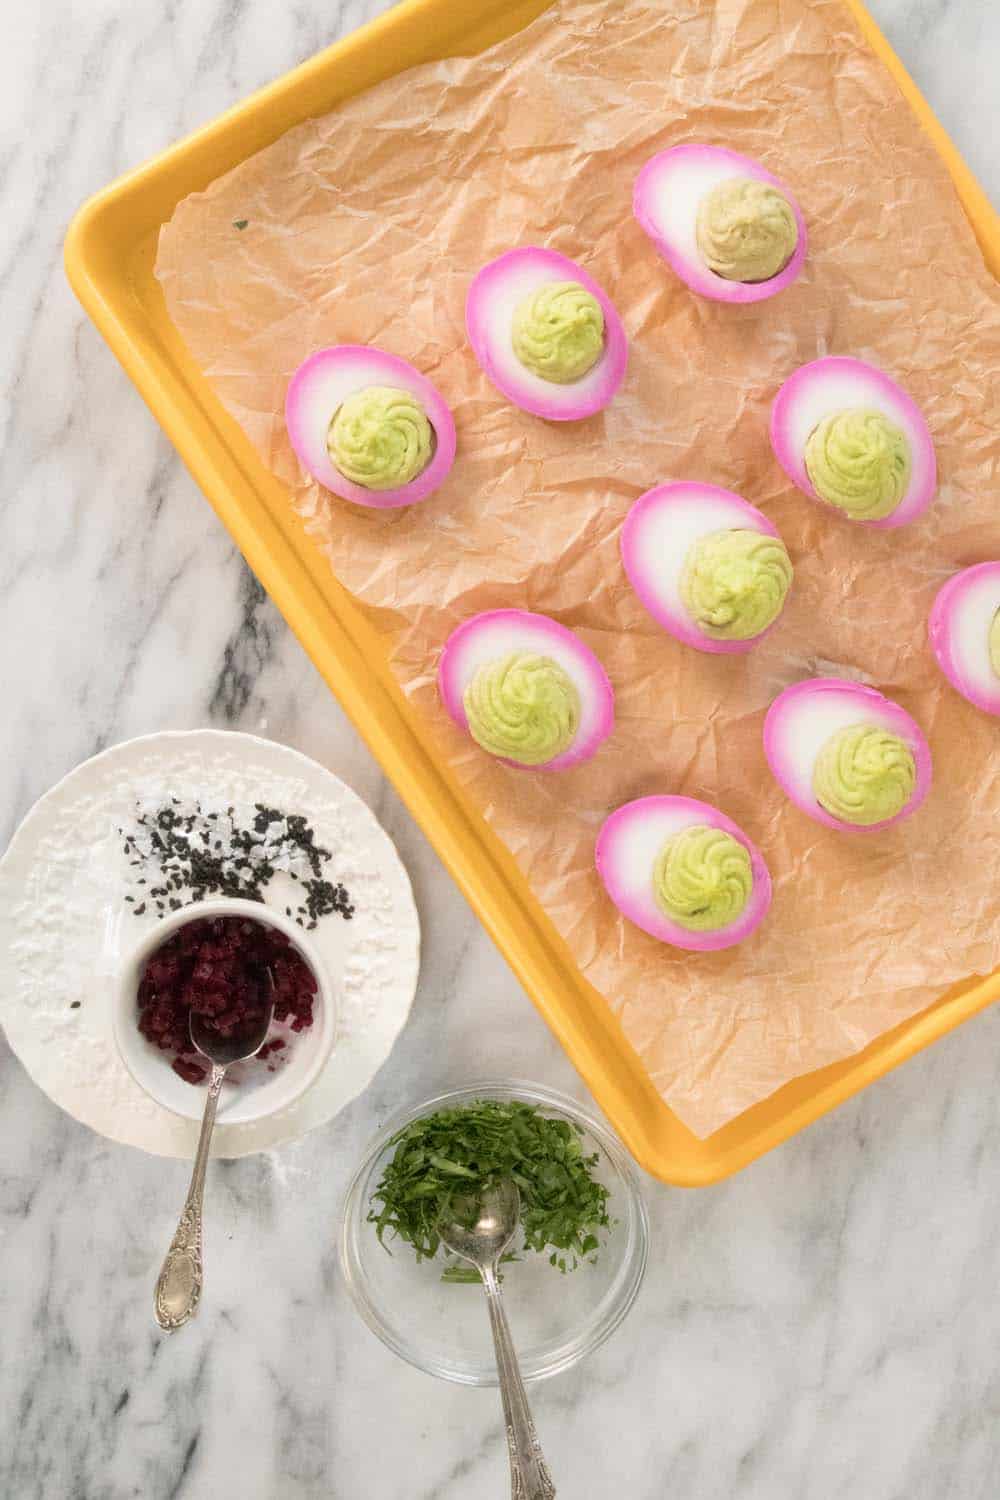 A sheet pan with deviled eggs ready to be garnished. The deviled eggs have pink rings around the outside of the egg white from picked beet juice and a light green filling.